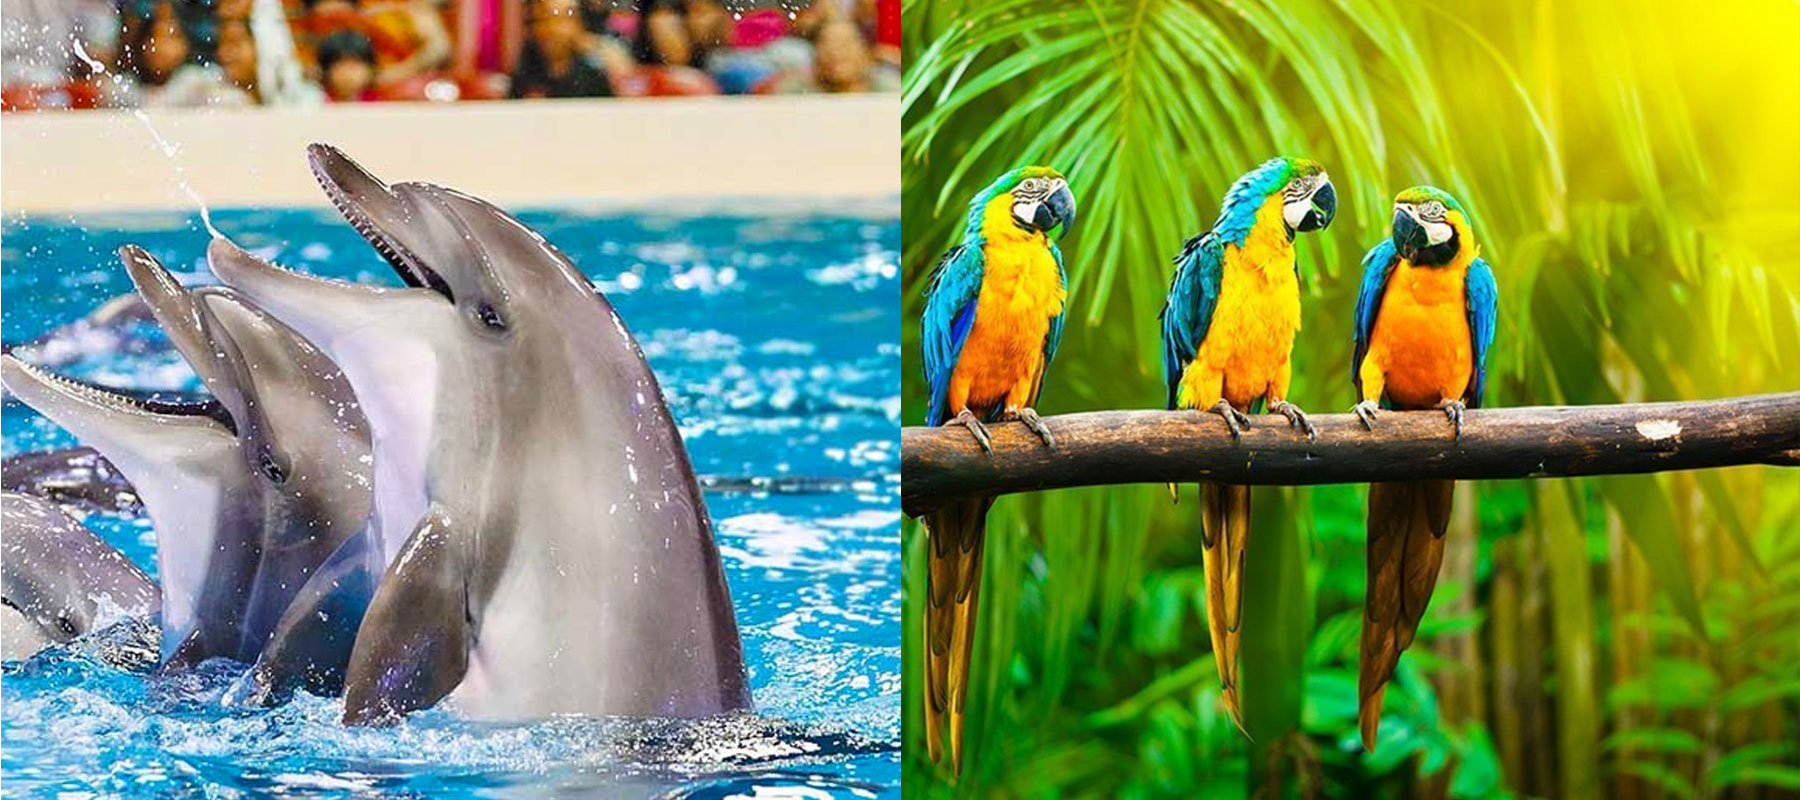 Immerse Yourself in Wonder explore dolphin park and bird garden on Kish island